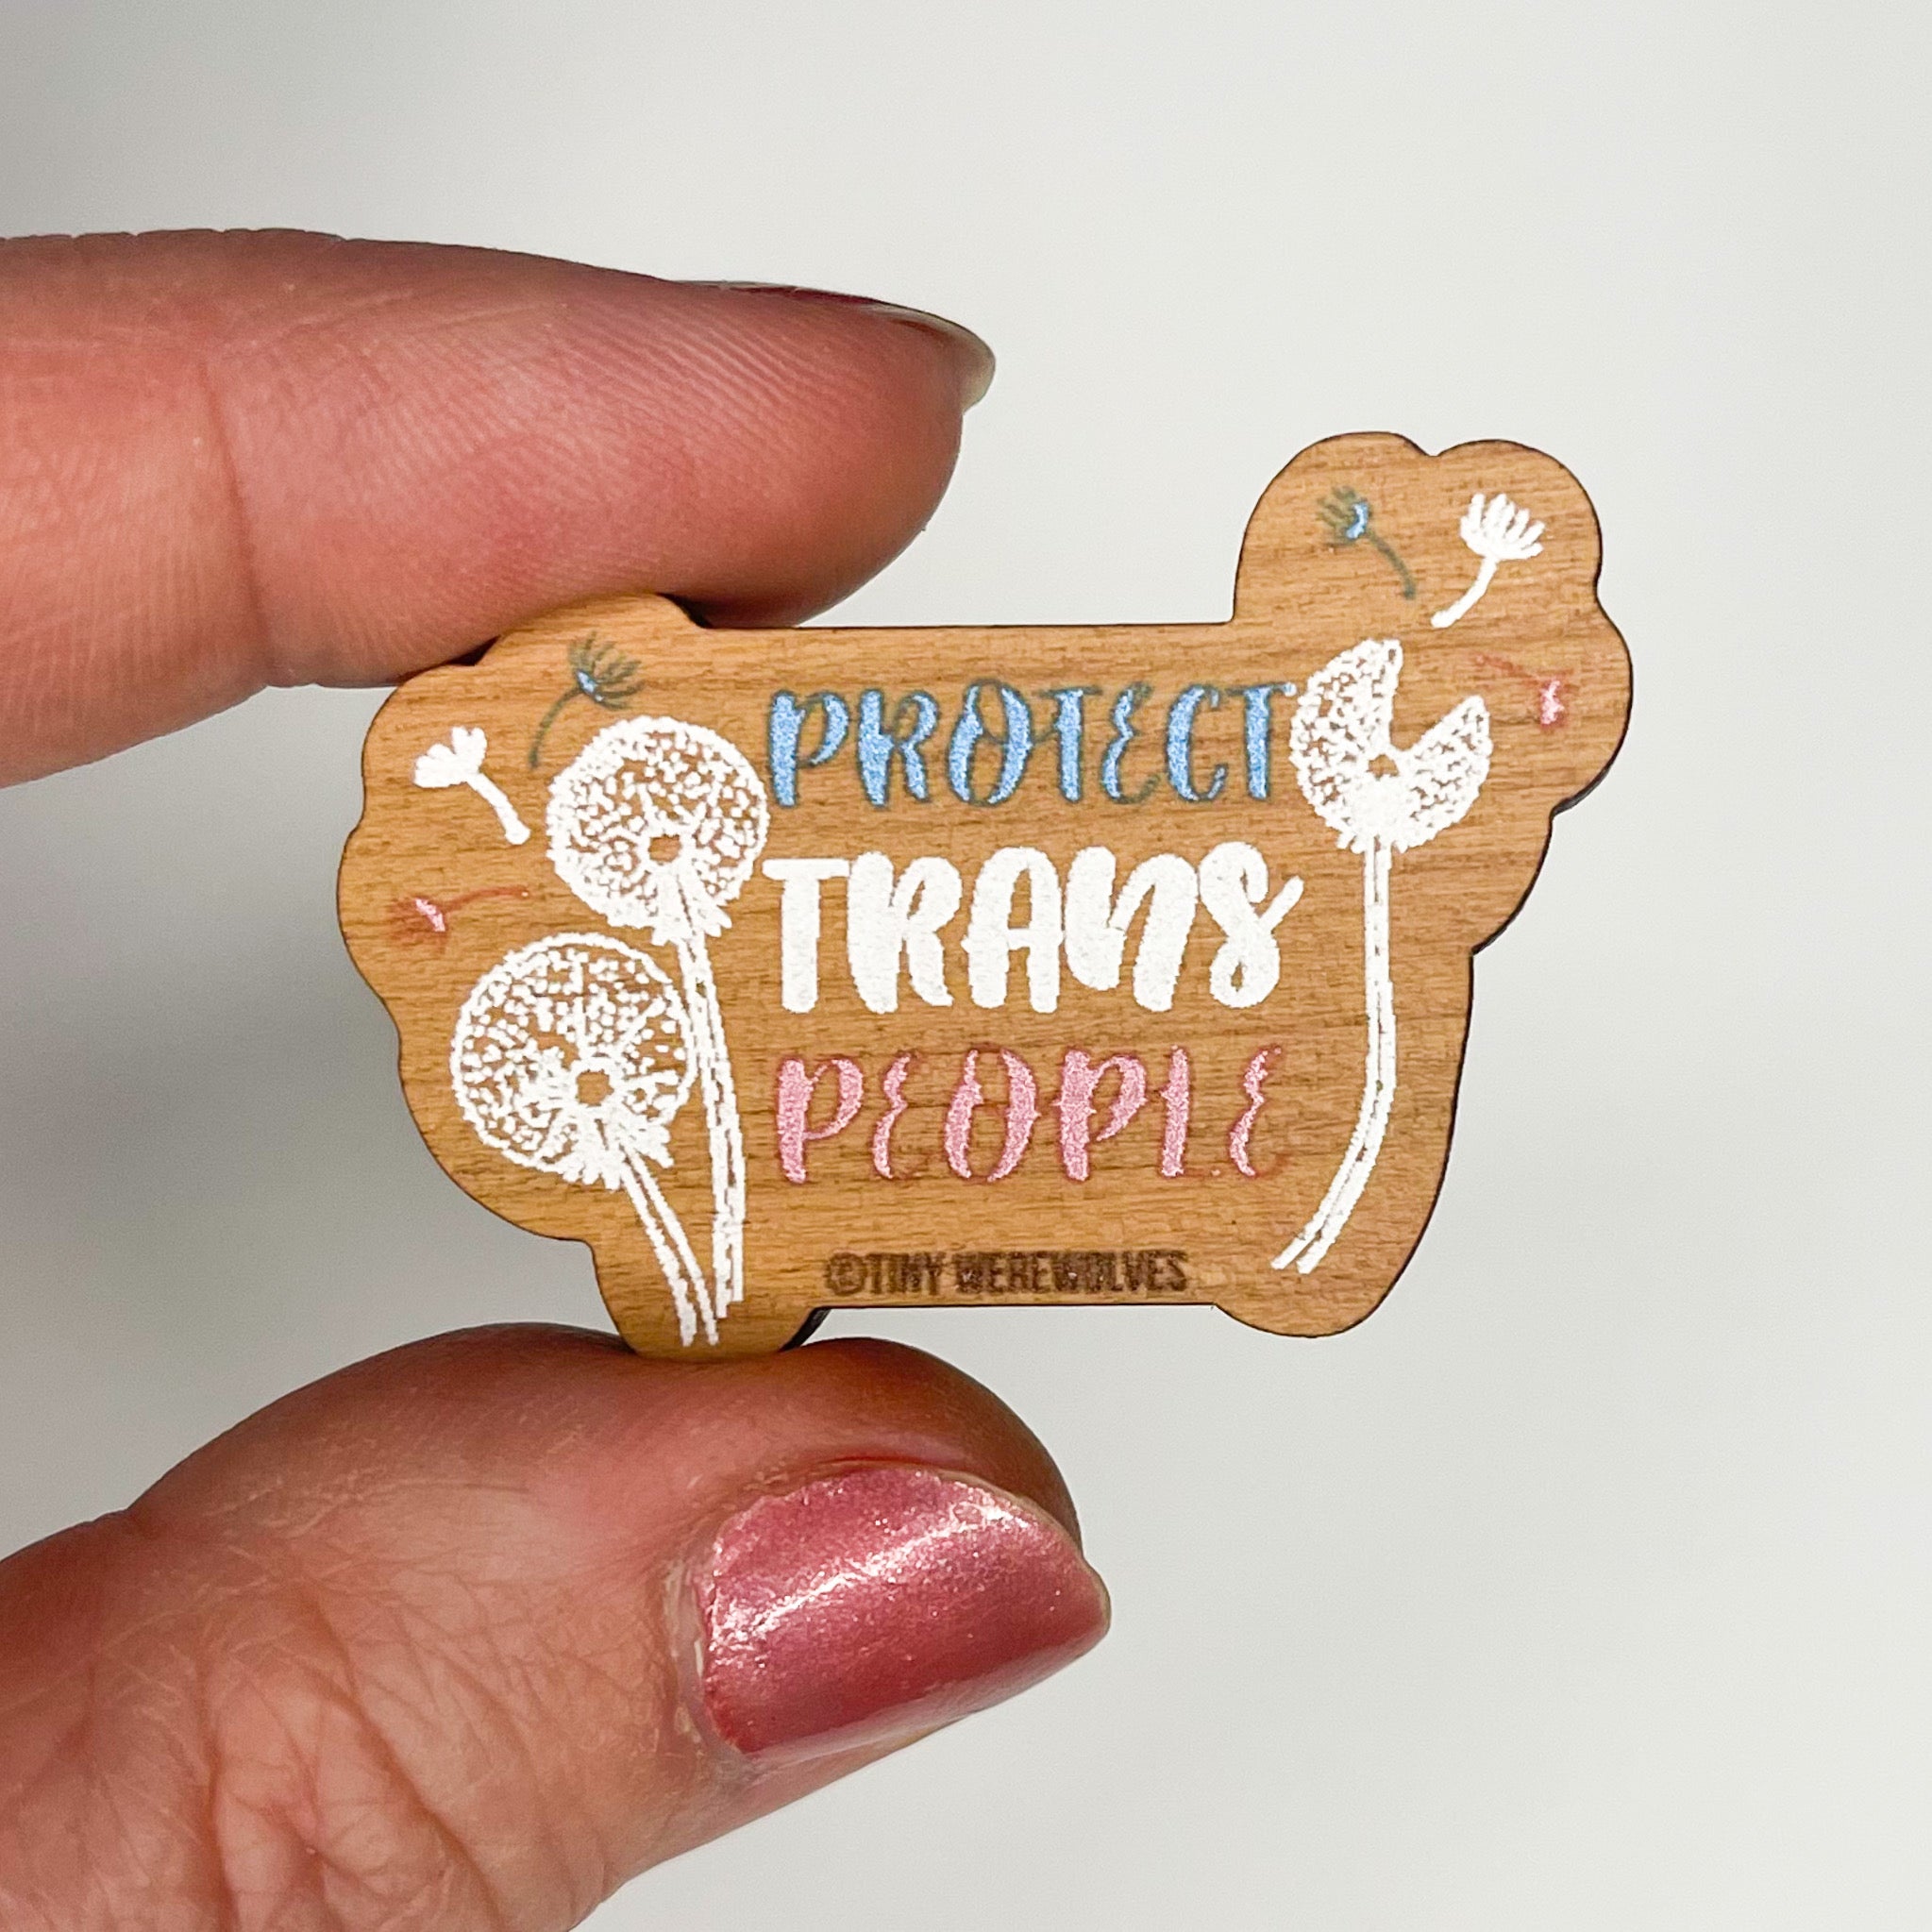 Protect Trans People Wood Pin (Discontinued Design)